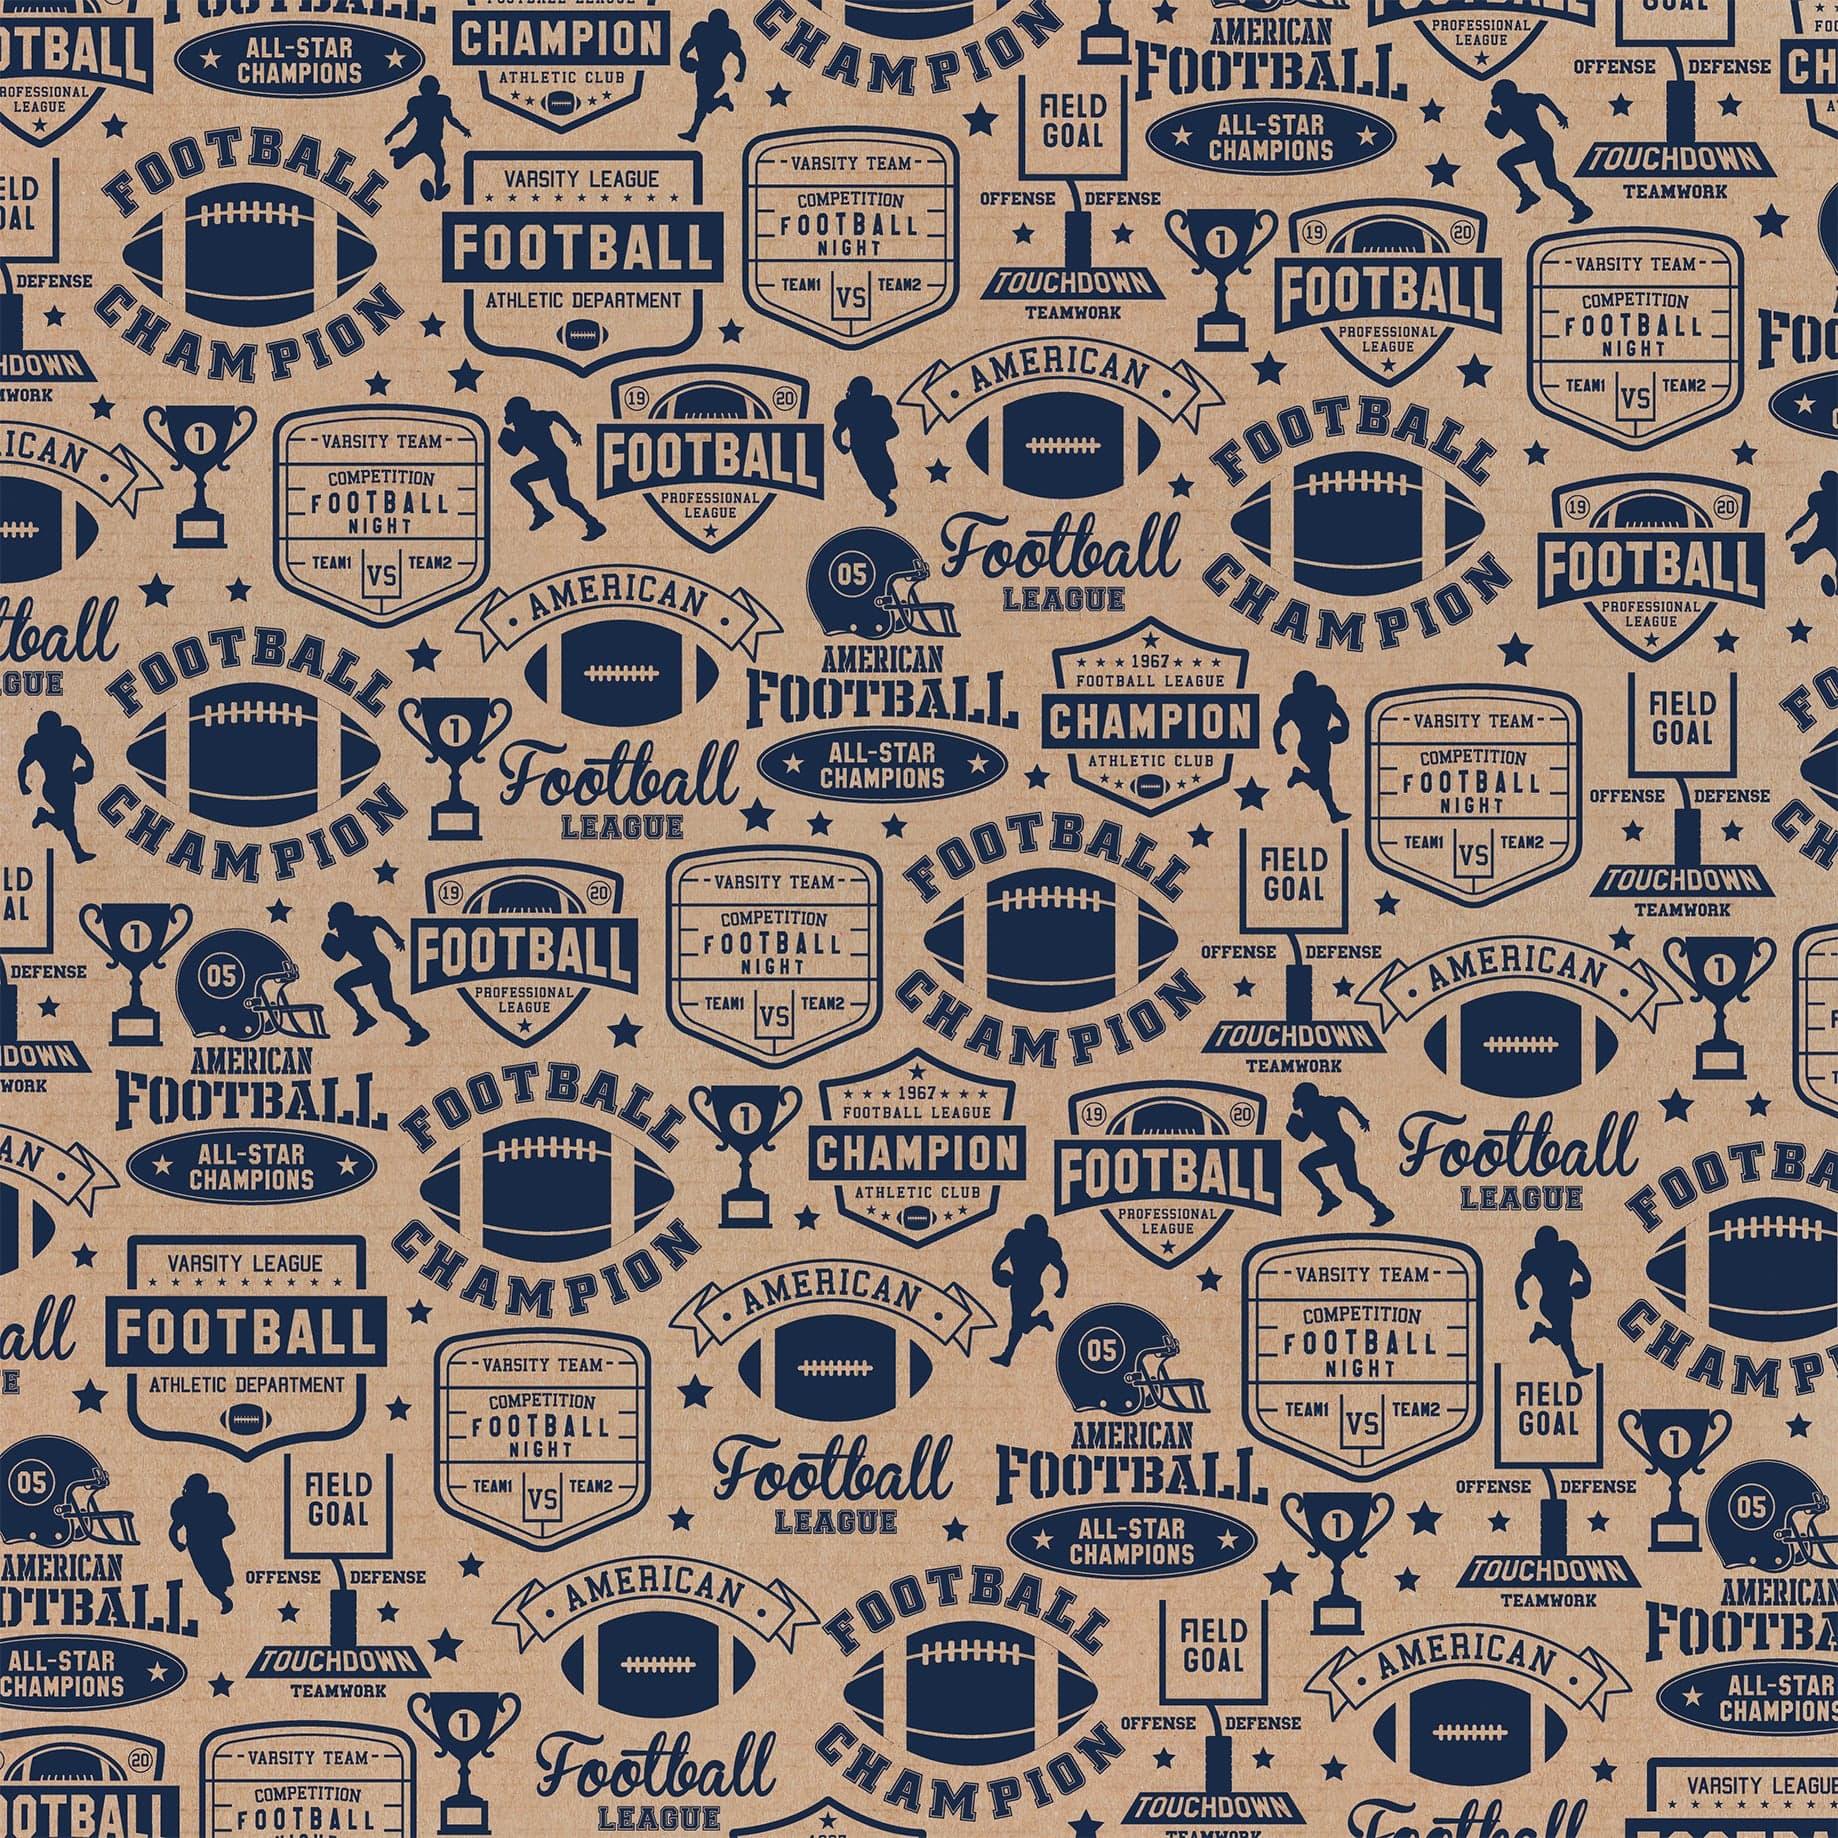 Football Collection Touchdown 12 x 12 Double-Sided Scrapbook Paper by Echo Park Paper - Scrapbook Supply Companies